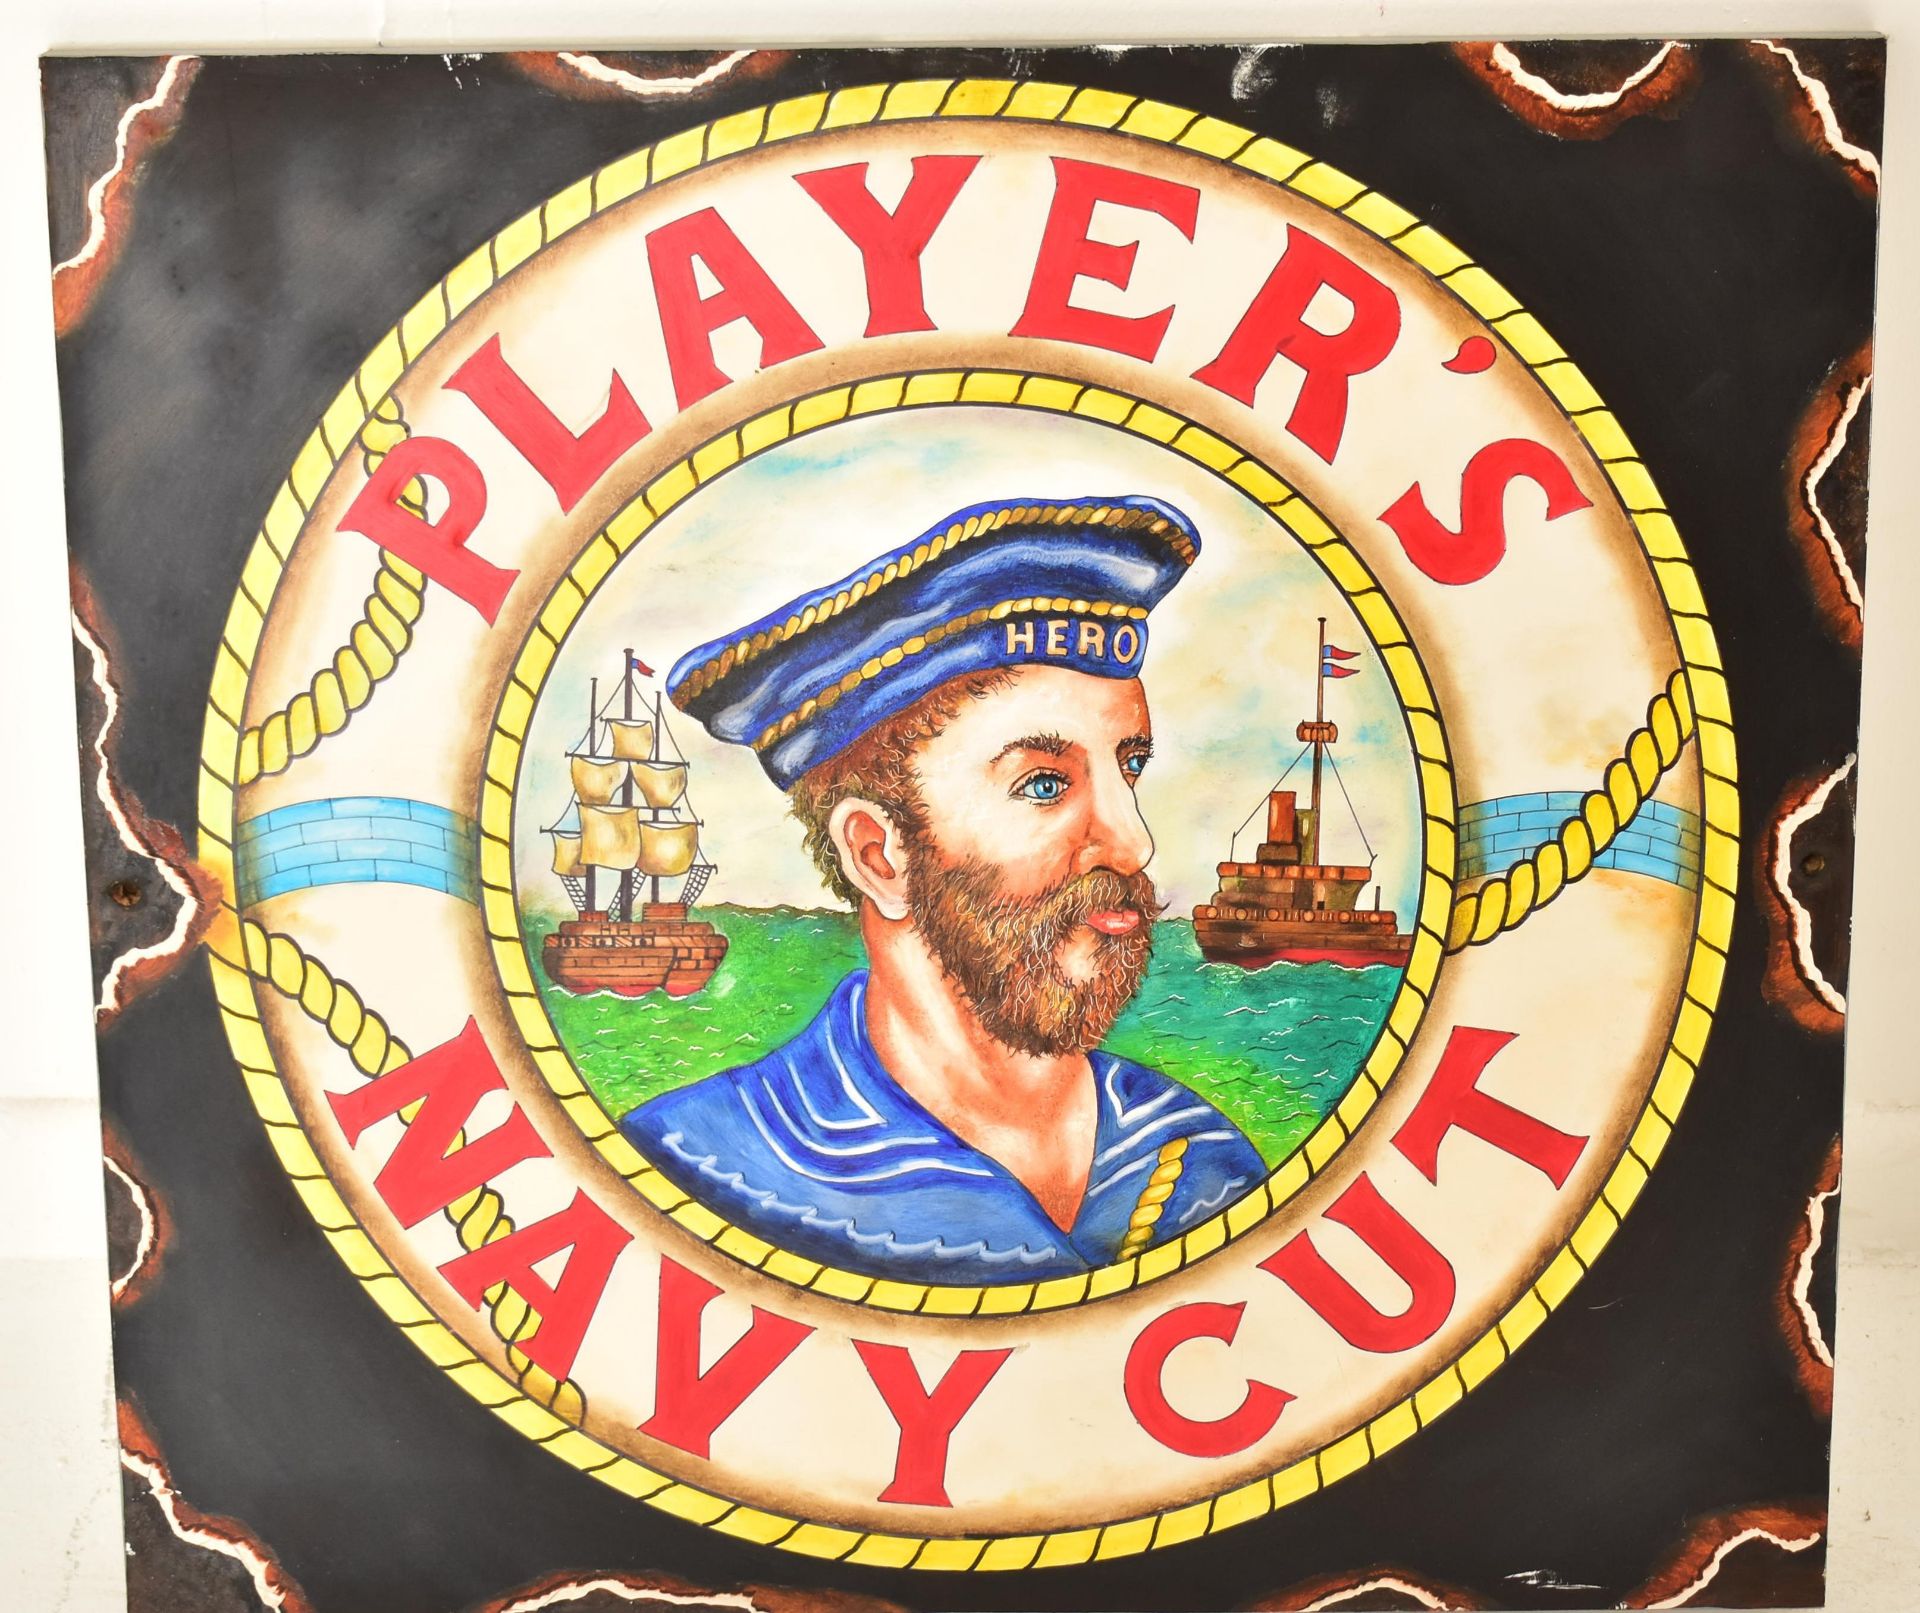 PLAYER'S NAVY CUT - OIL ON BOARD ARTIST IMPRESSION OF A SIGN